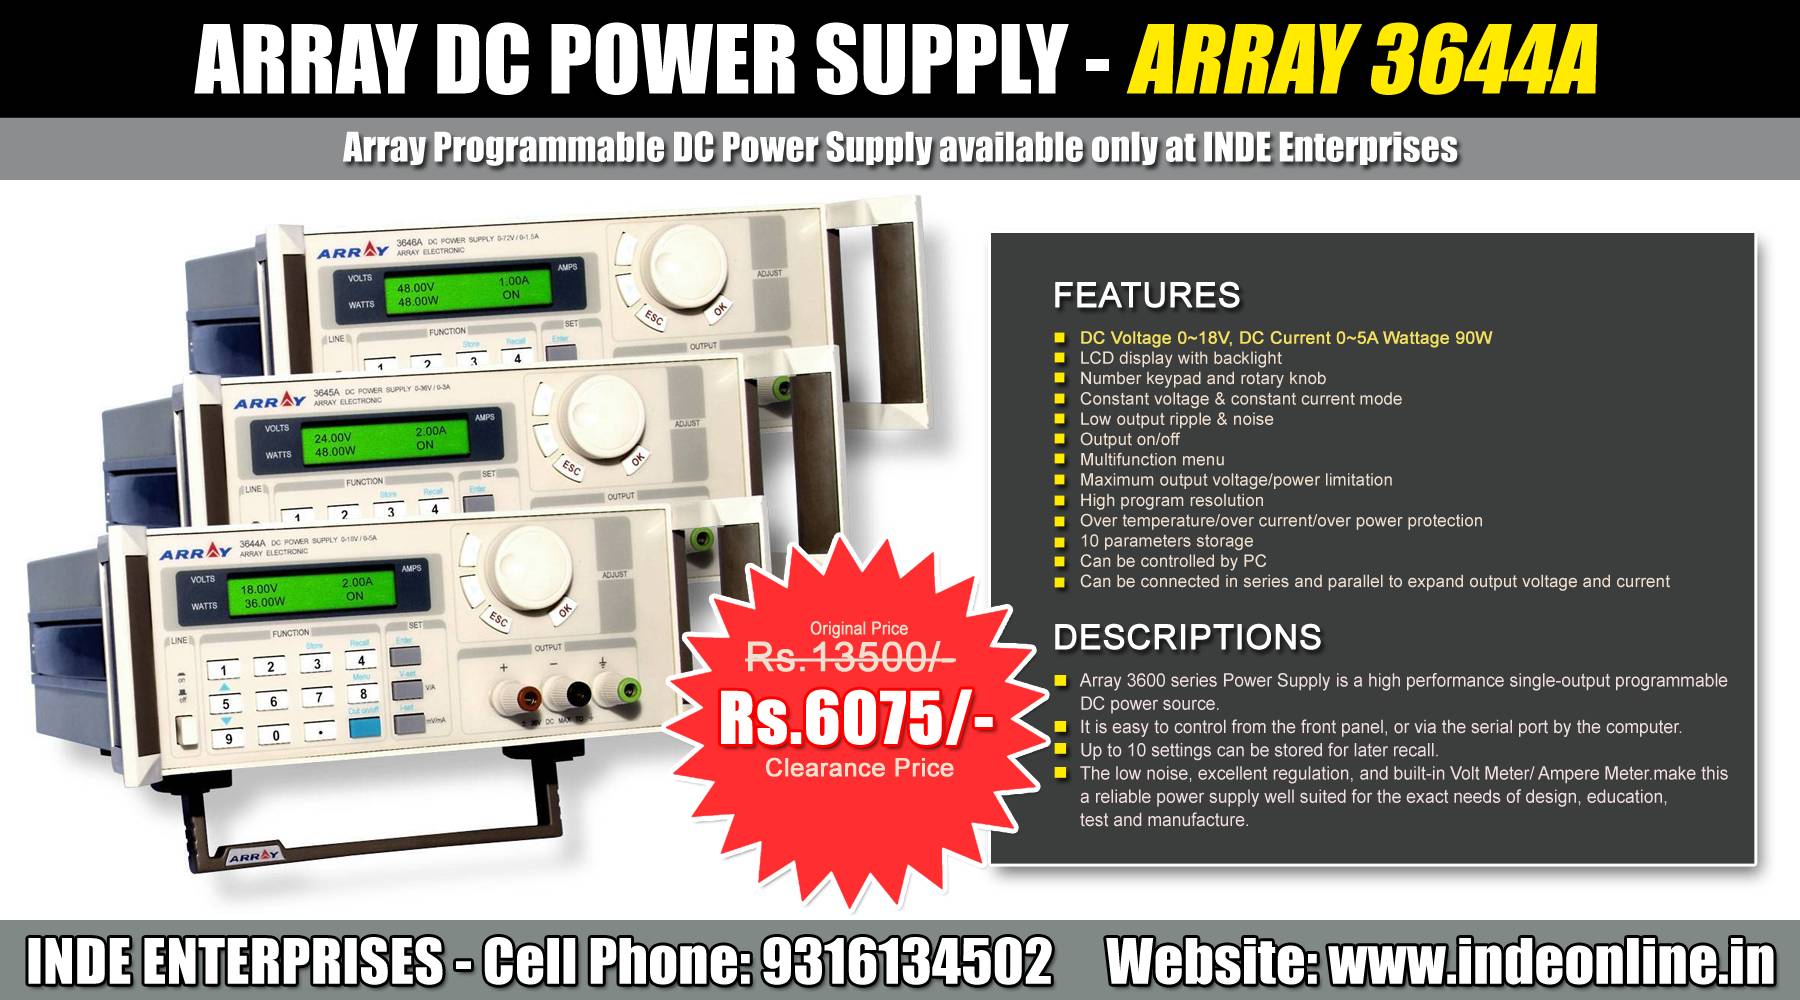 Array DC Power Supply Price Rs.6075/-